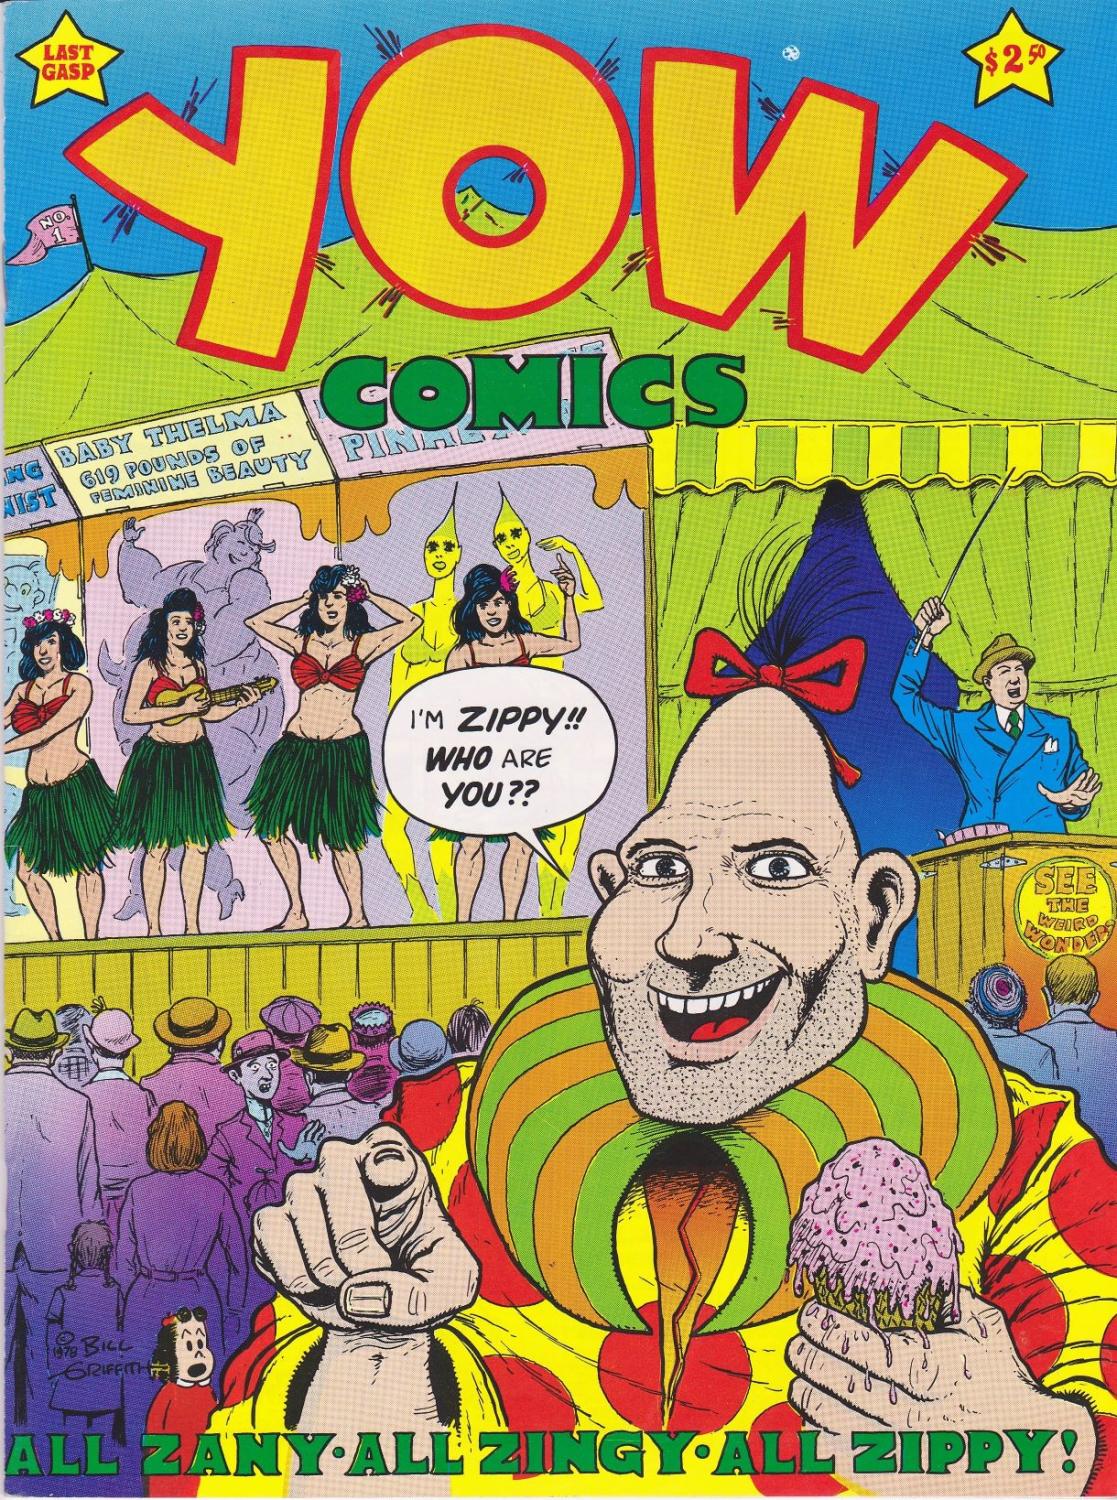 YOW No. 1 (Zippy the Pinhead) by Bill Griffith: (1978) 1st Edition Comic |  Walther's Books